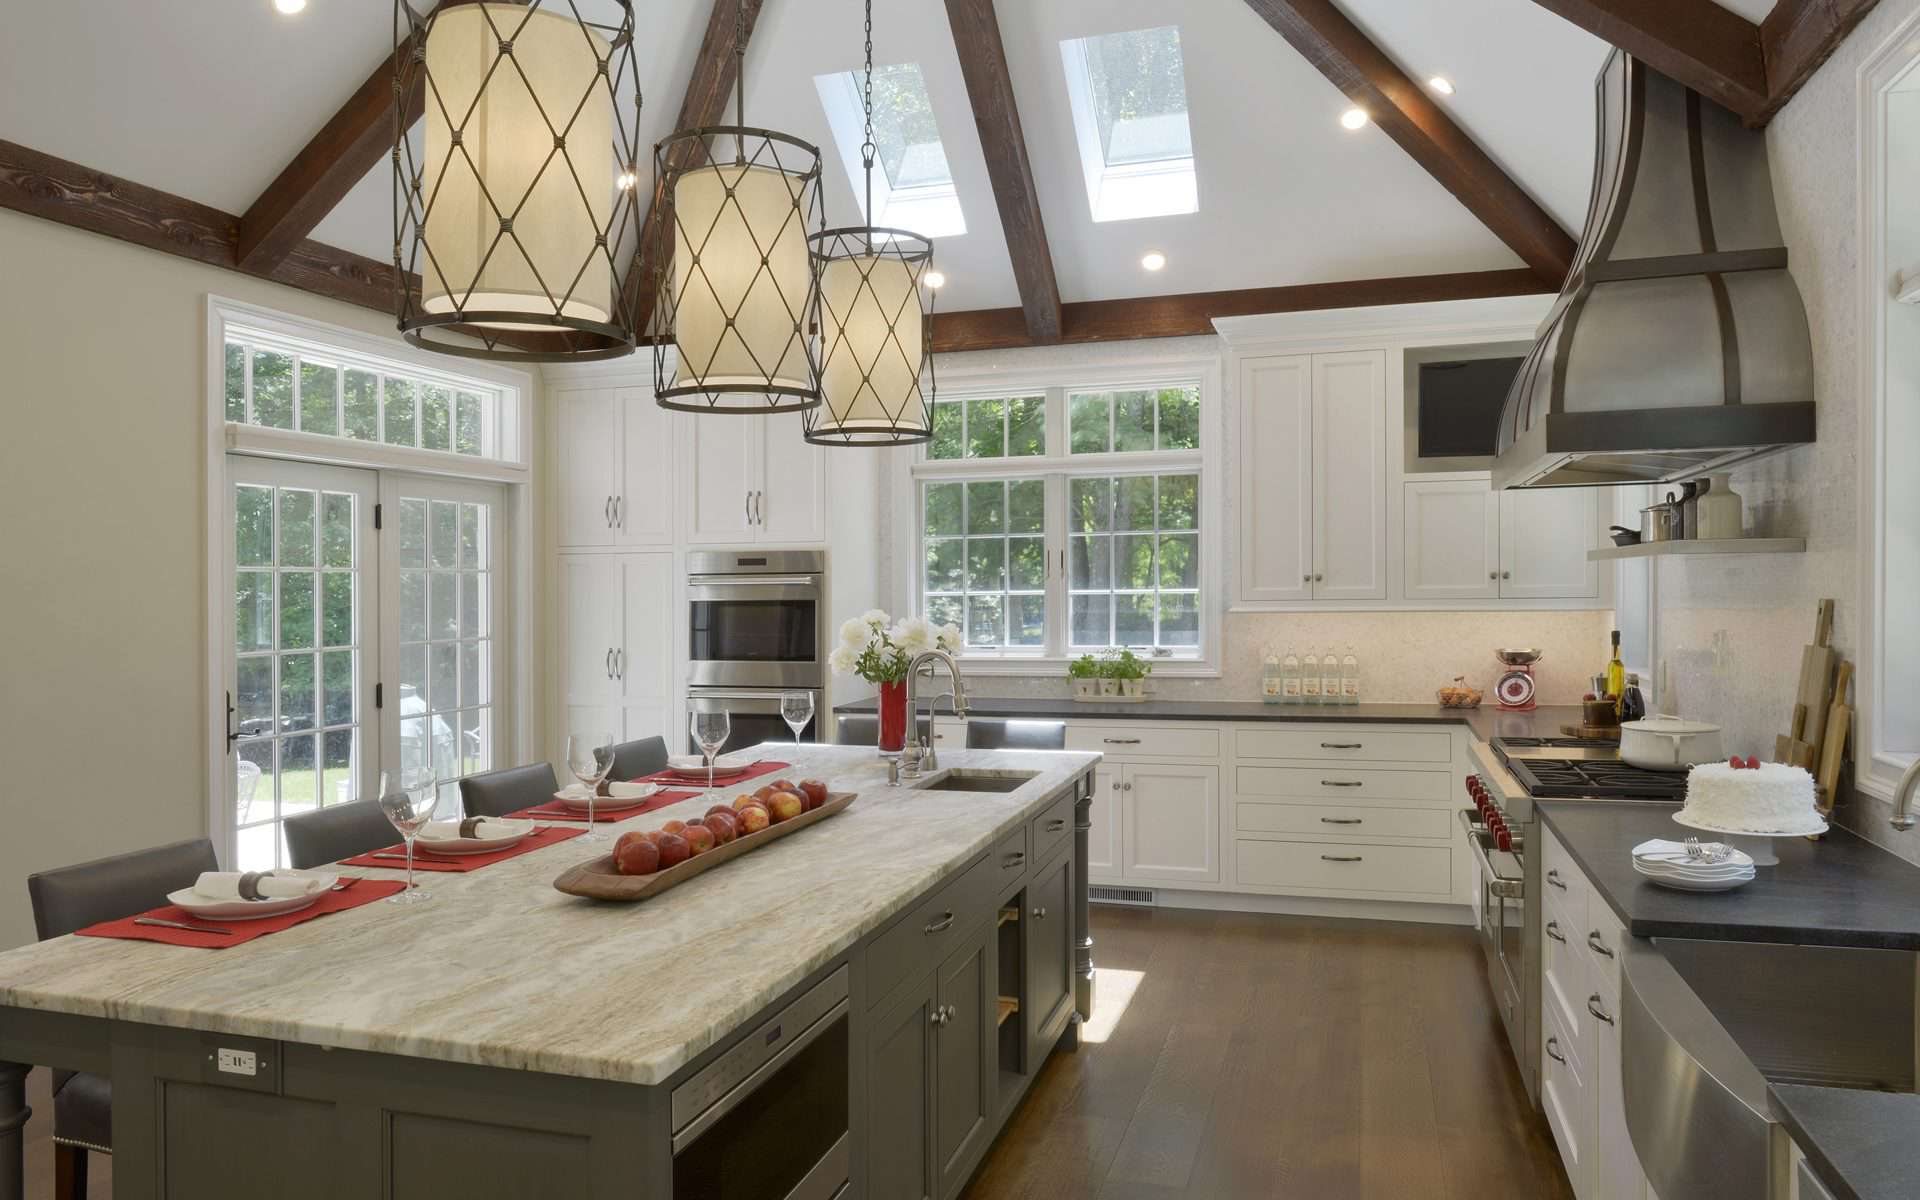 Elegant French-country style kitchen features gray custom island, dark wood beams and spacious sunlit windows.